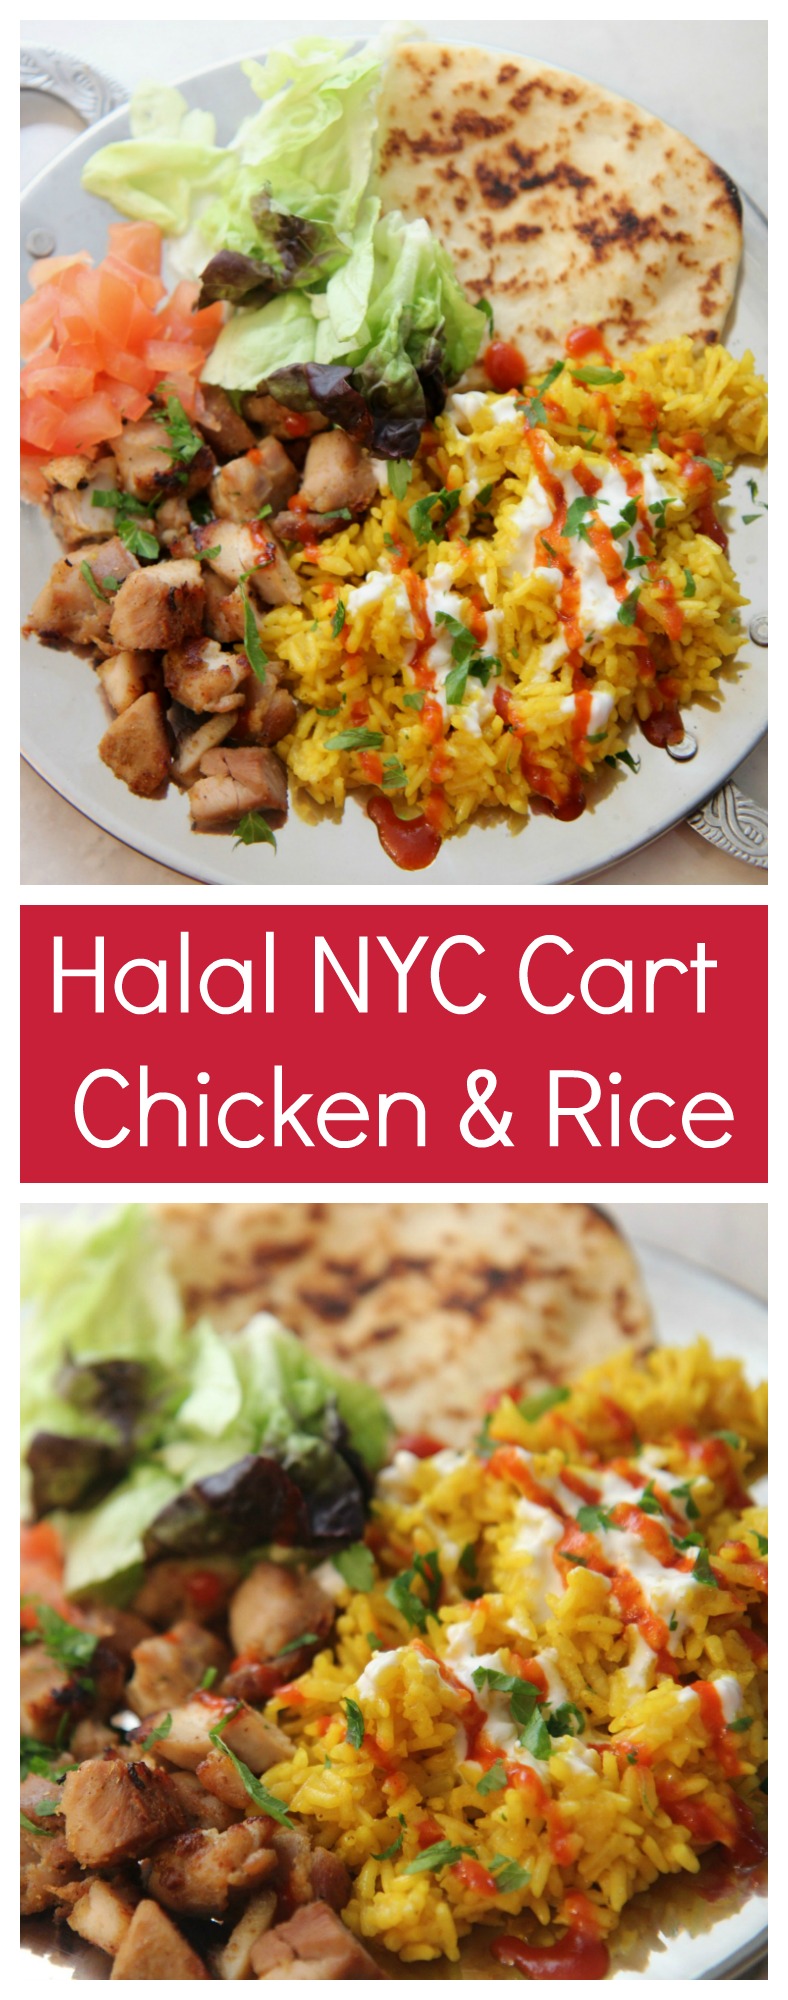 This Halal NYC Cart Chicken and Rice recipe can be found at cookedbyjulie.com